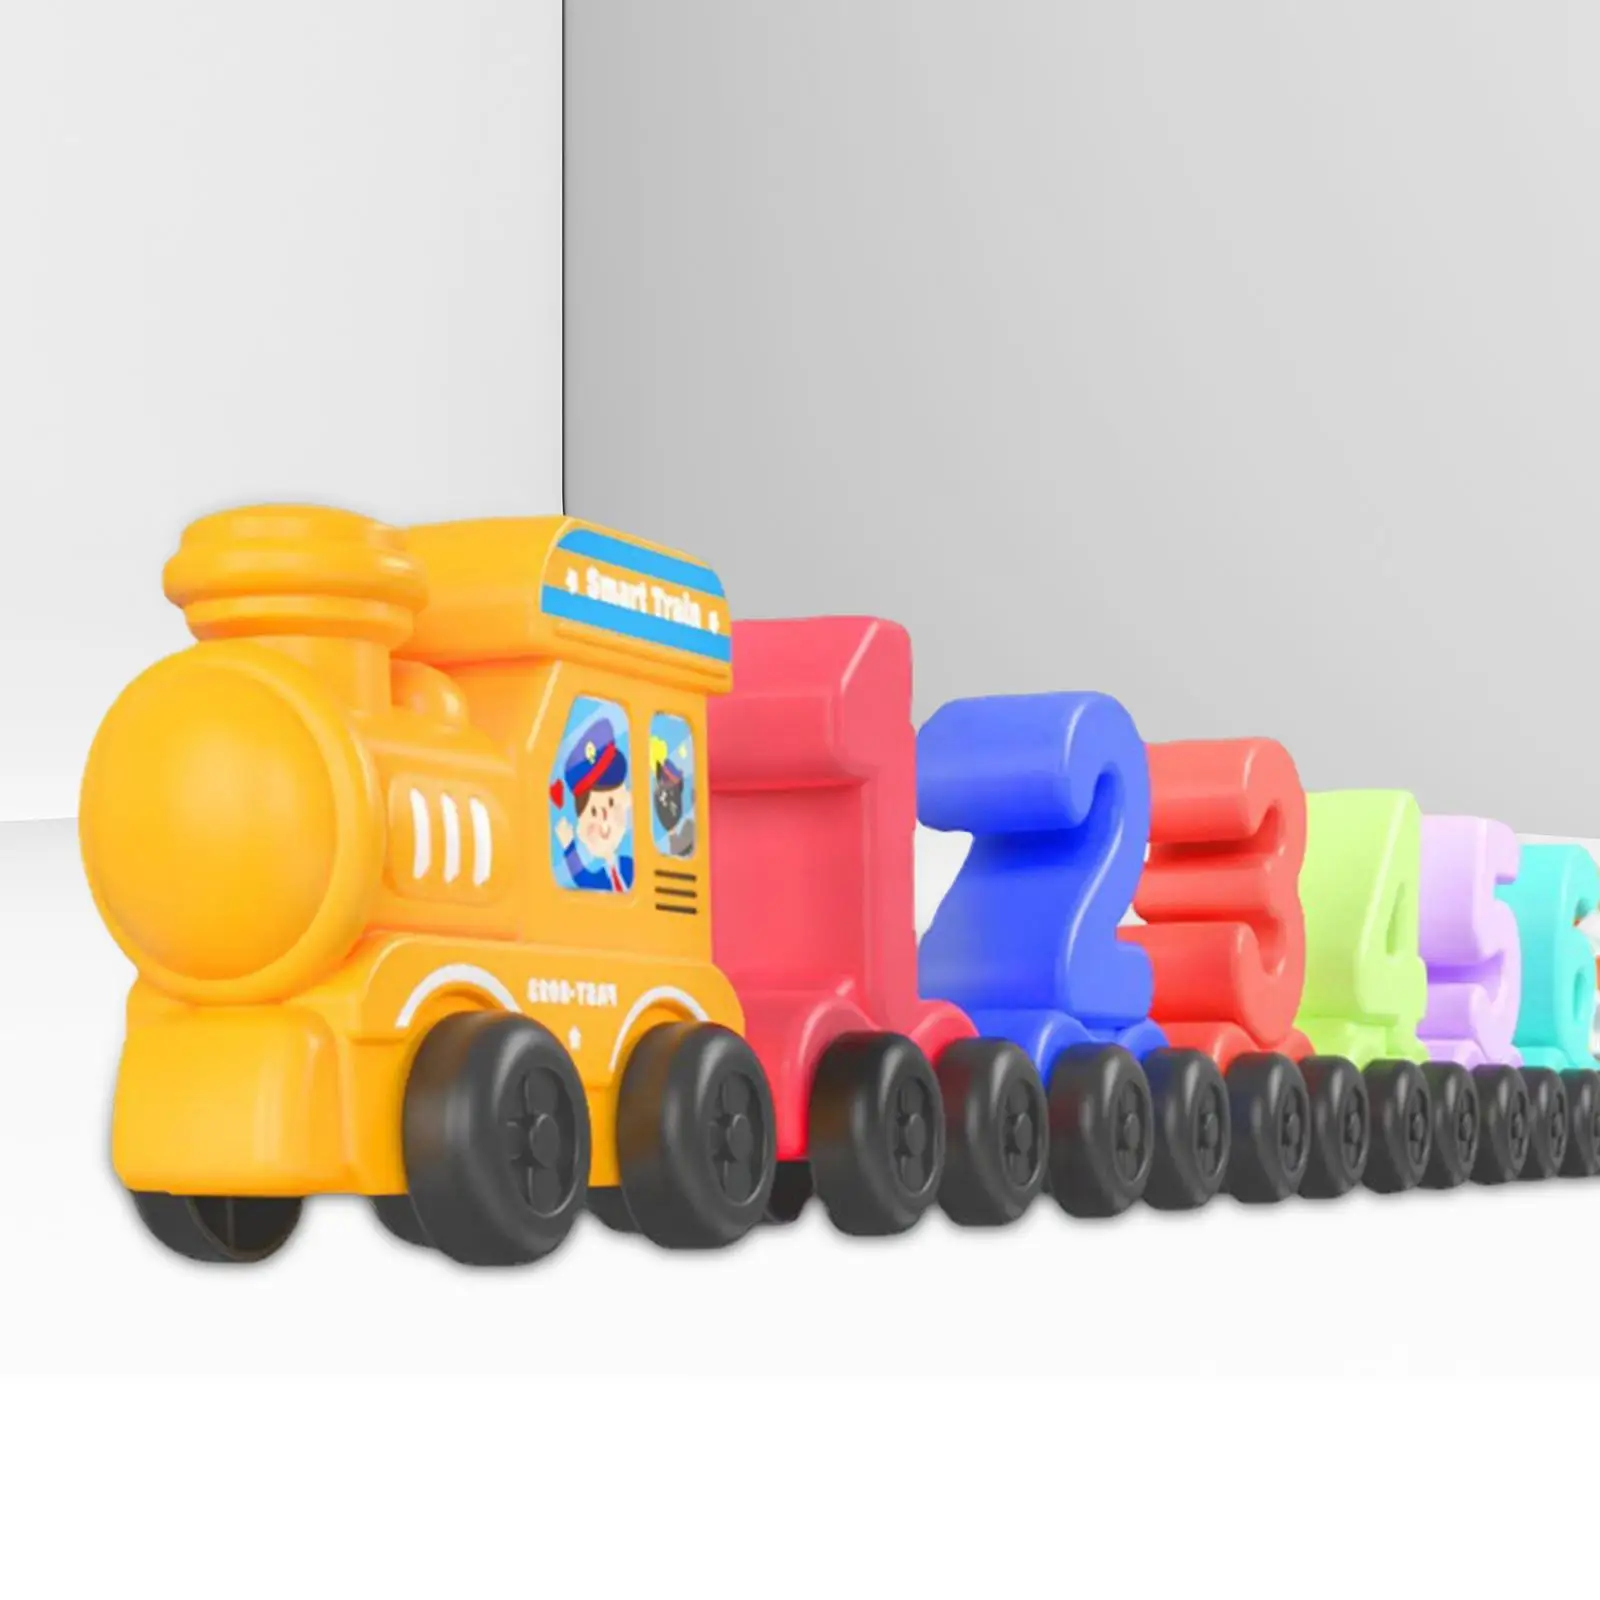 11 Piece Wooden Number Train Set Developmental Toy Preschool Learning Activities Colorful Play Set Wooden Train Set for Indoor